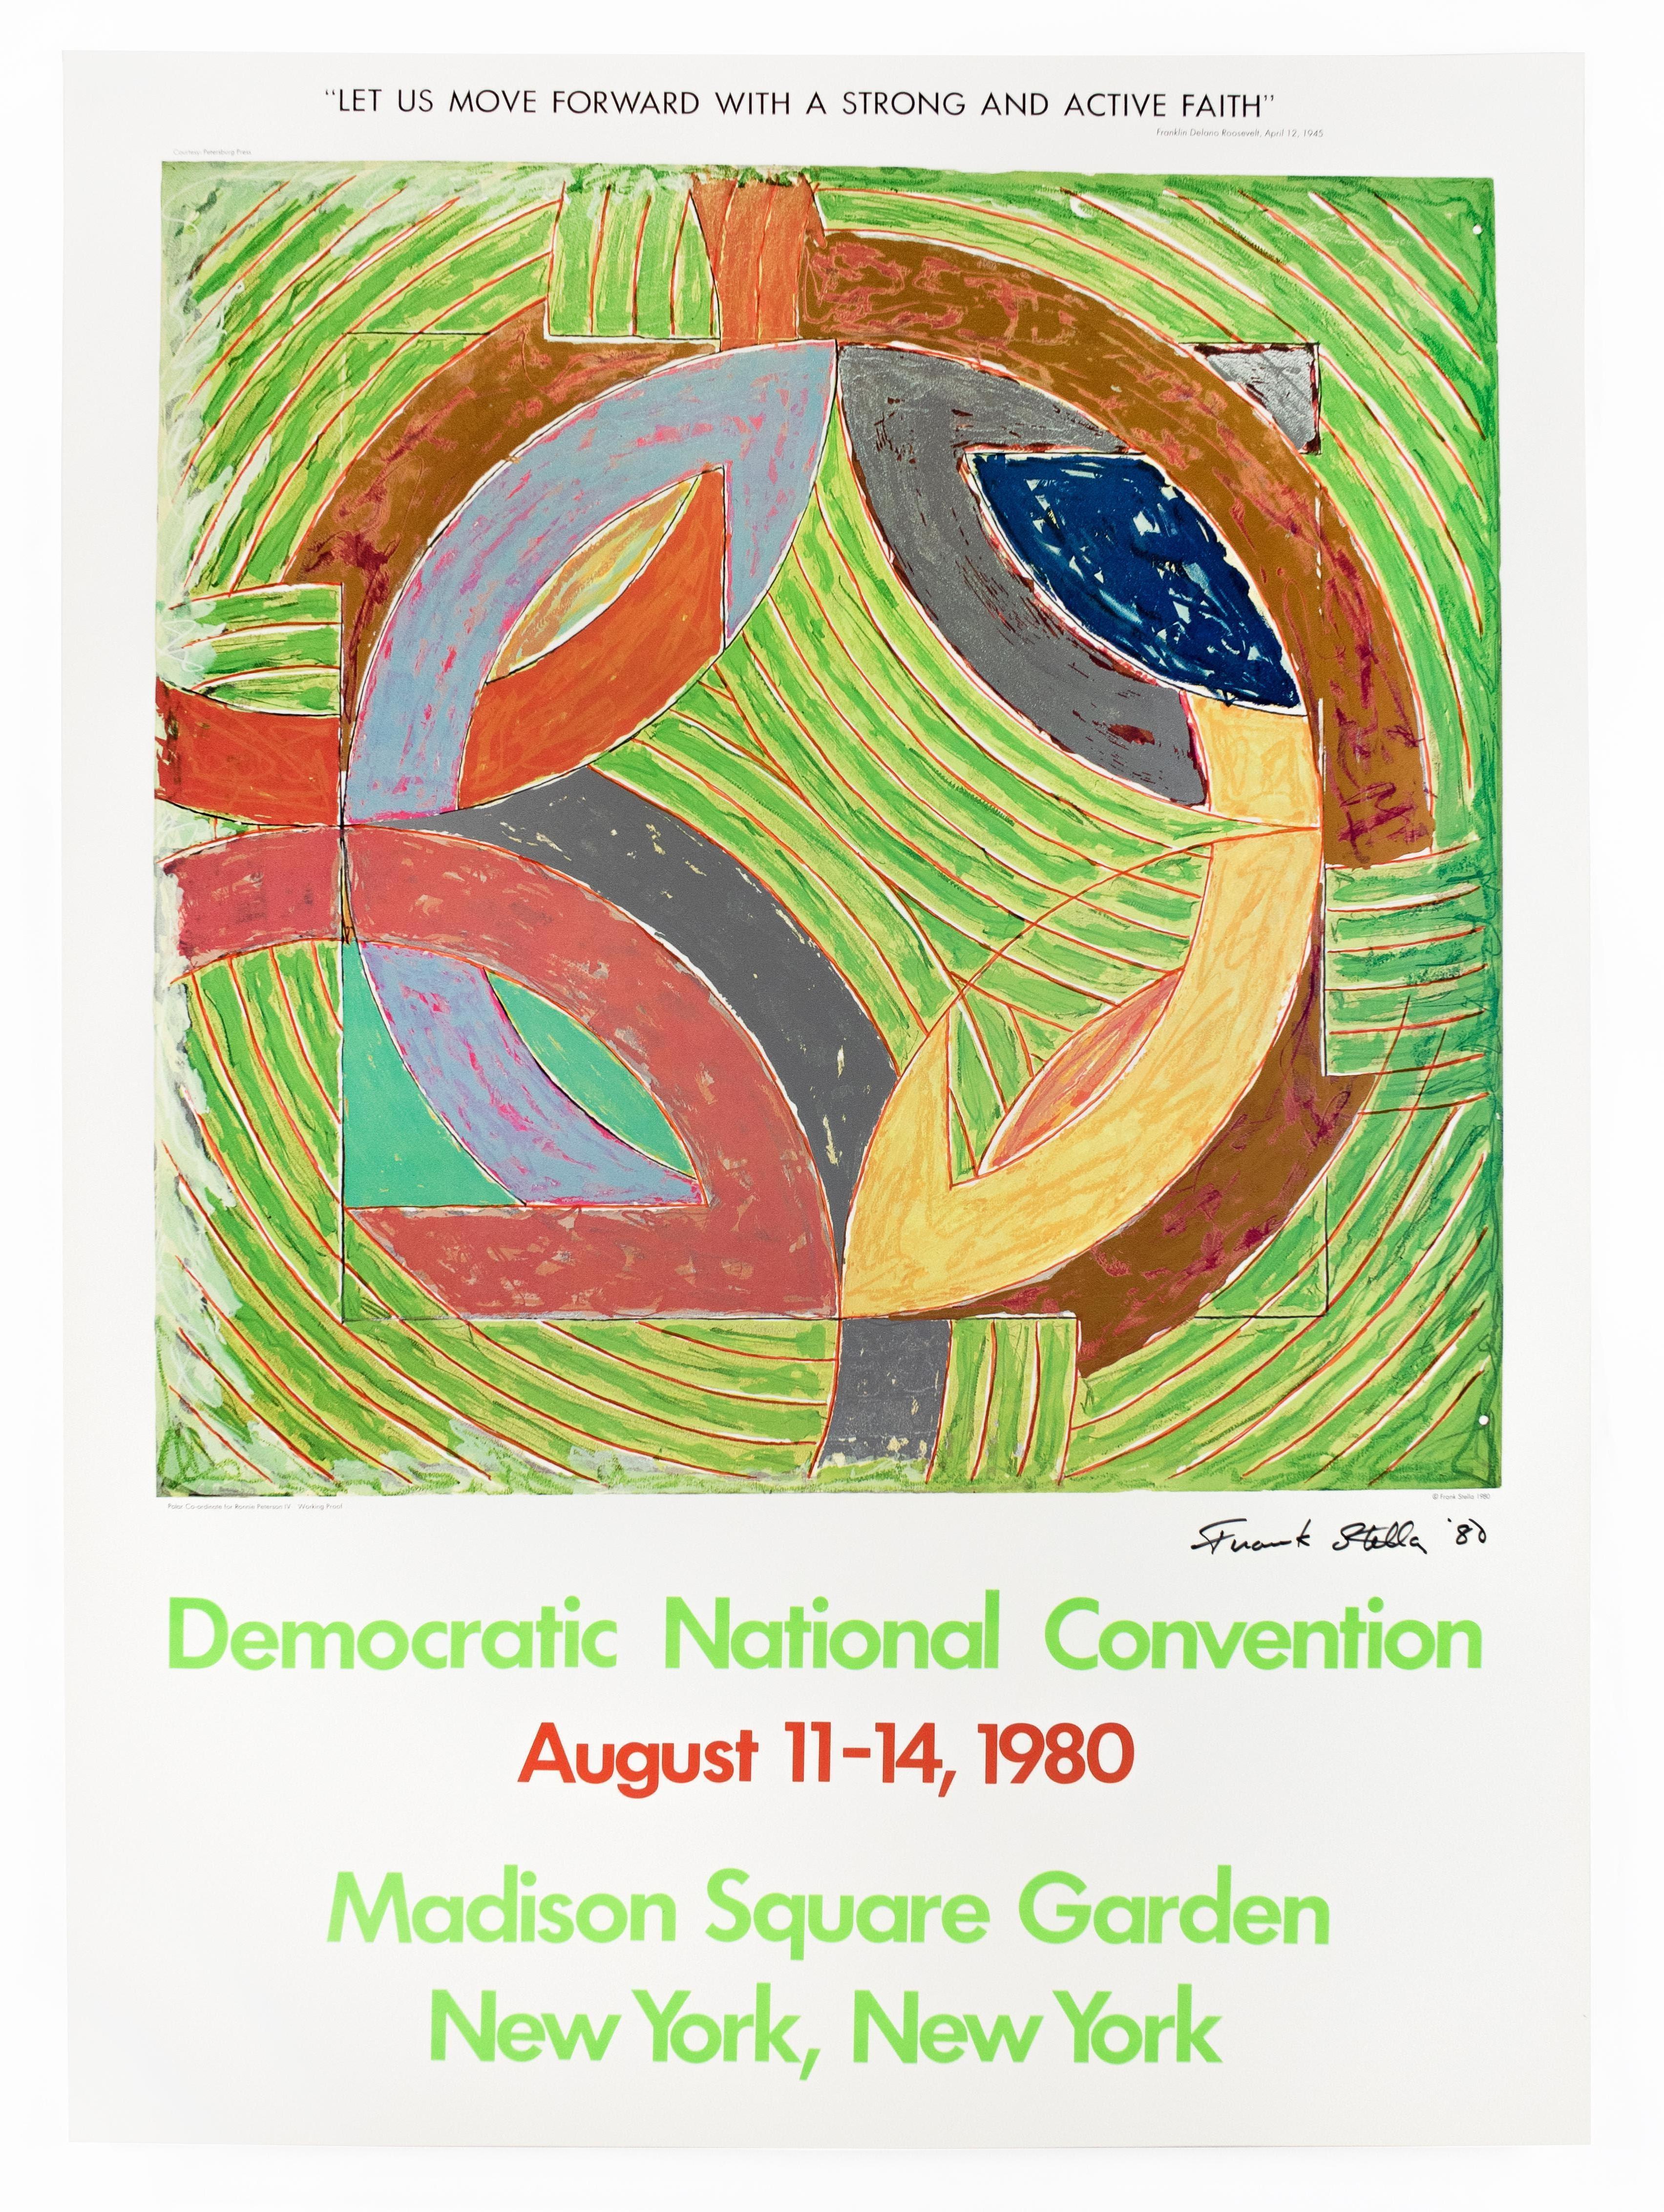 This vintage poster was designed by the artist in our studio and comes directly from our Petersburg Press archive. It is not pre-owned.

Colorful vintage poster for the 1980 Democratic National Convention, held in Madison Square Garden in New York.